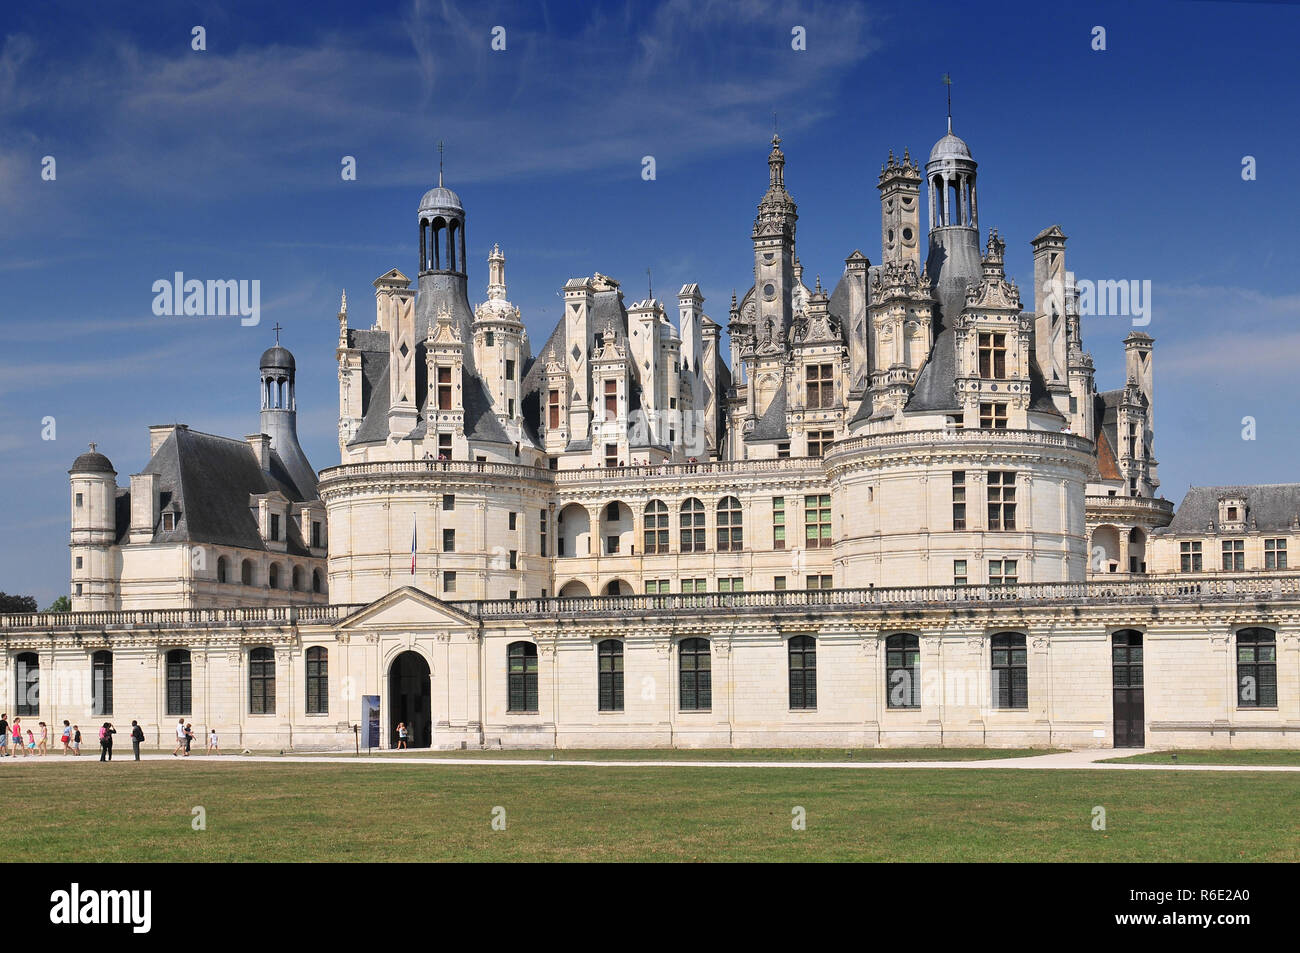 Chateau De Chambord Royal Medieval French Castle Loire Valley France Europe Unesco Heritage Site Stock Photo